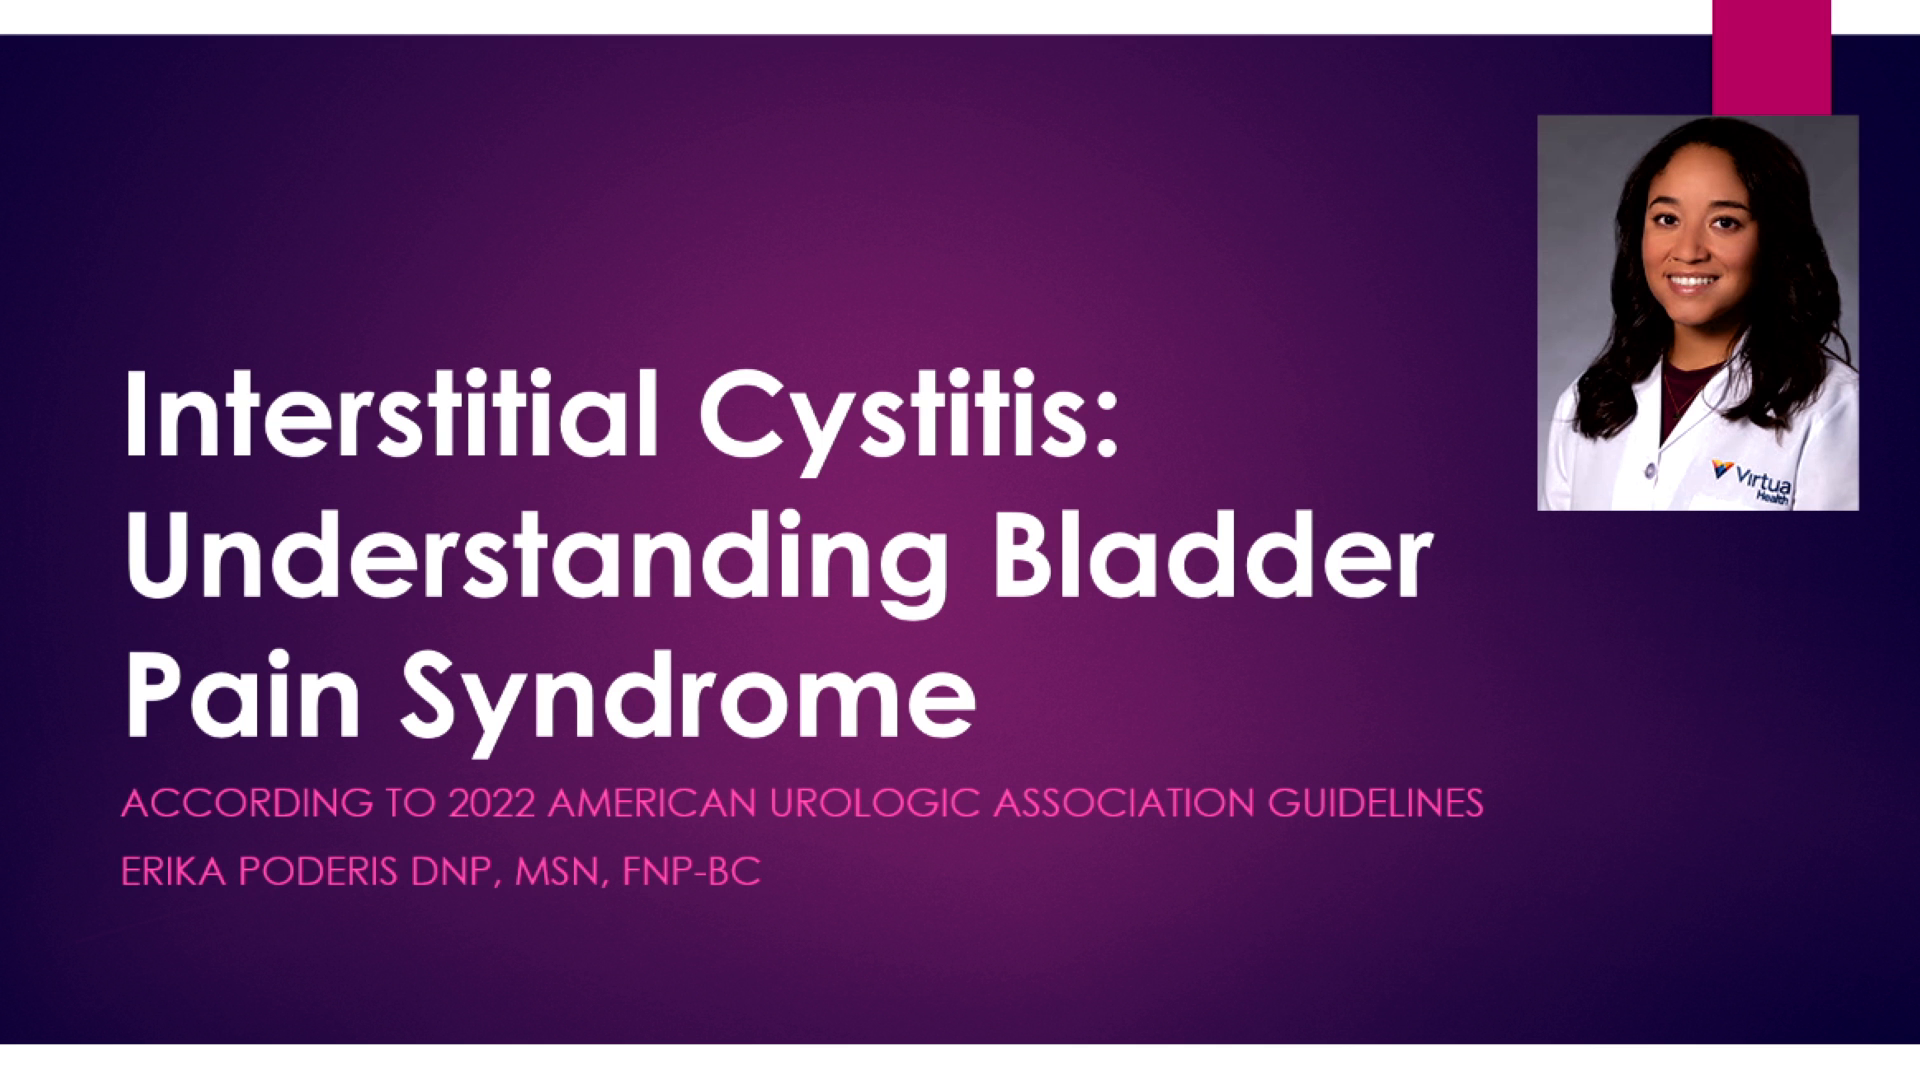 Interstitial Cystitis: Understanding Bladder Pain Syndrome icon